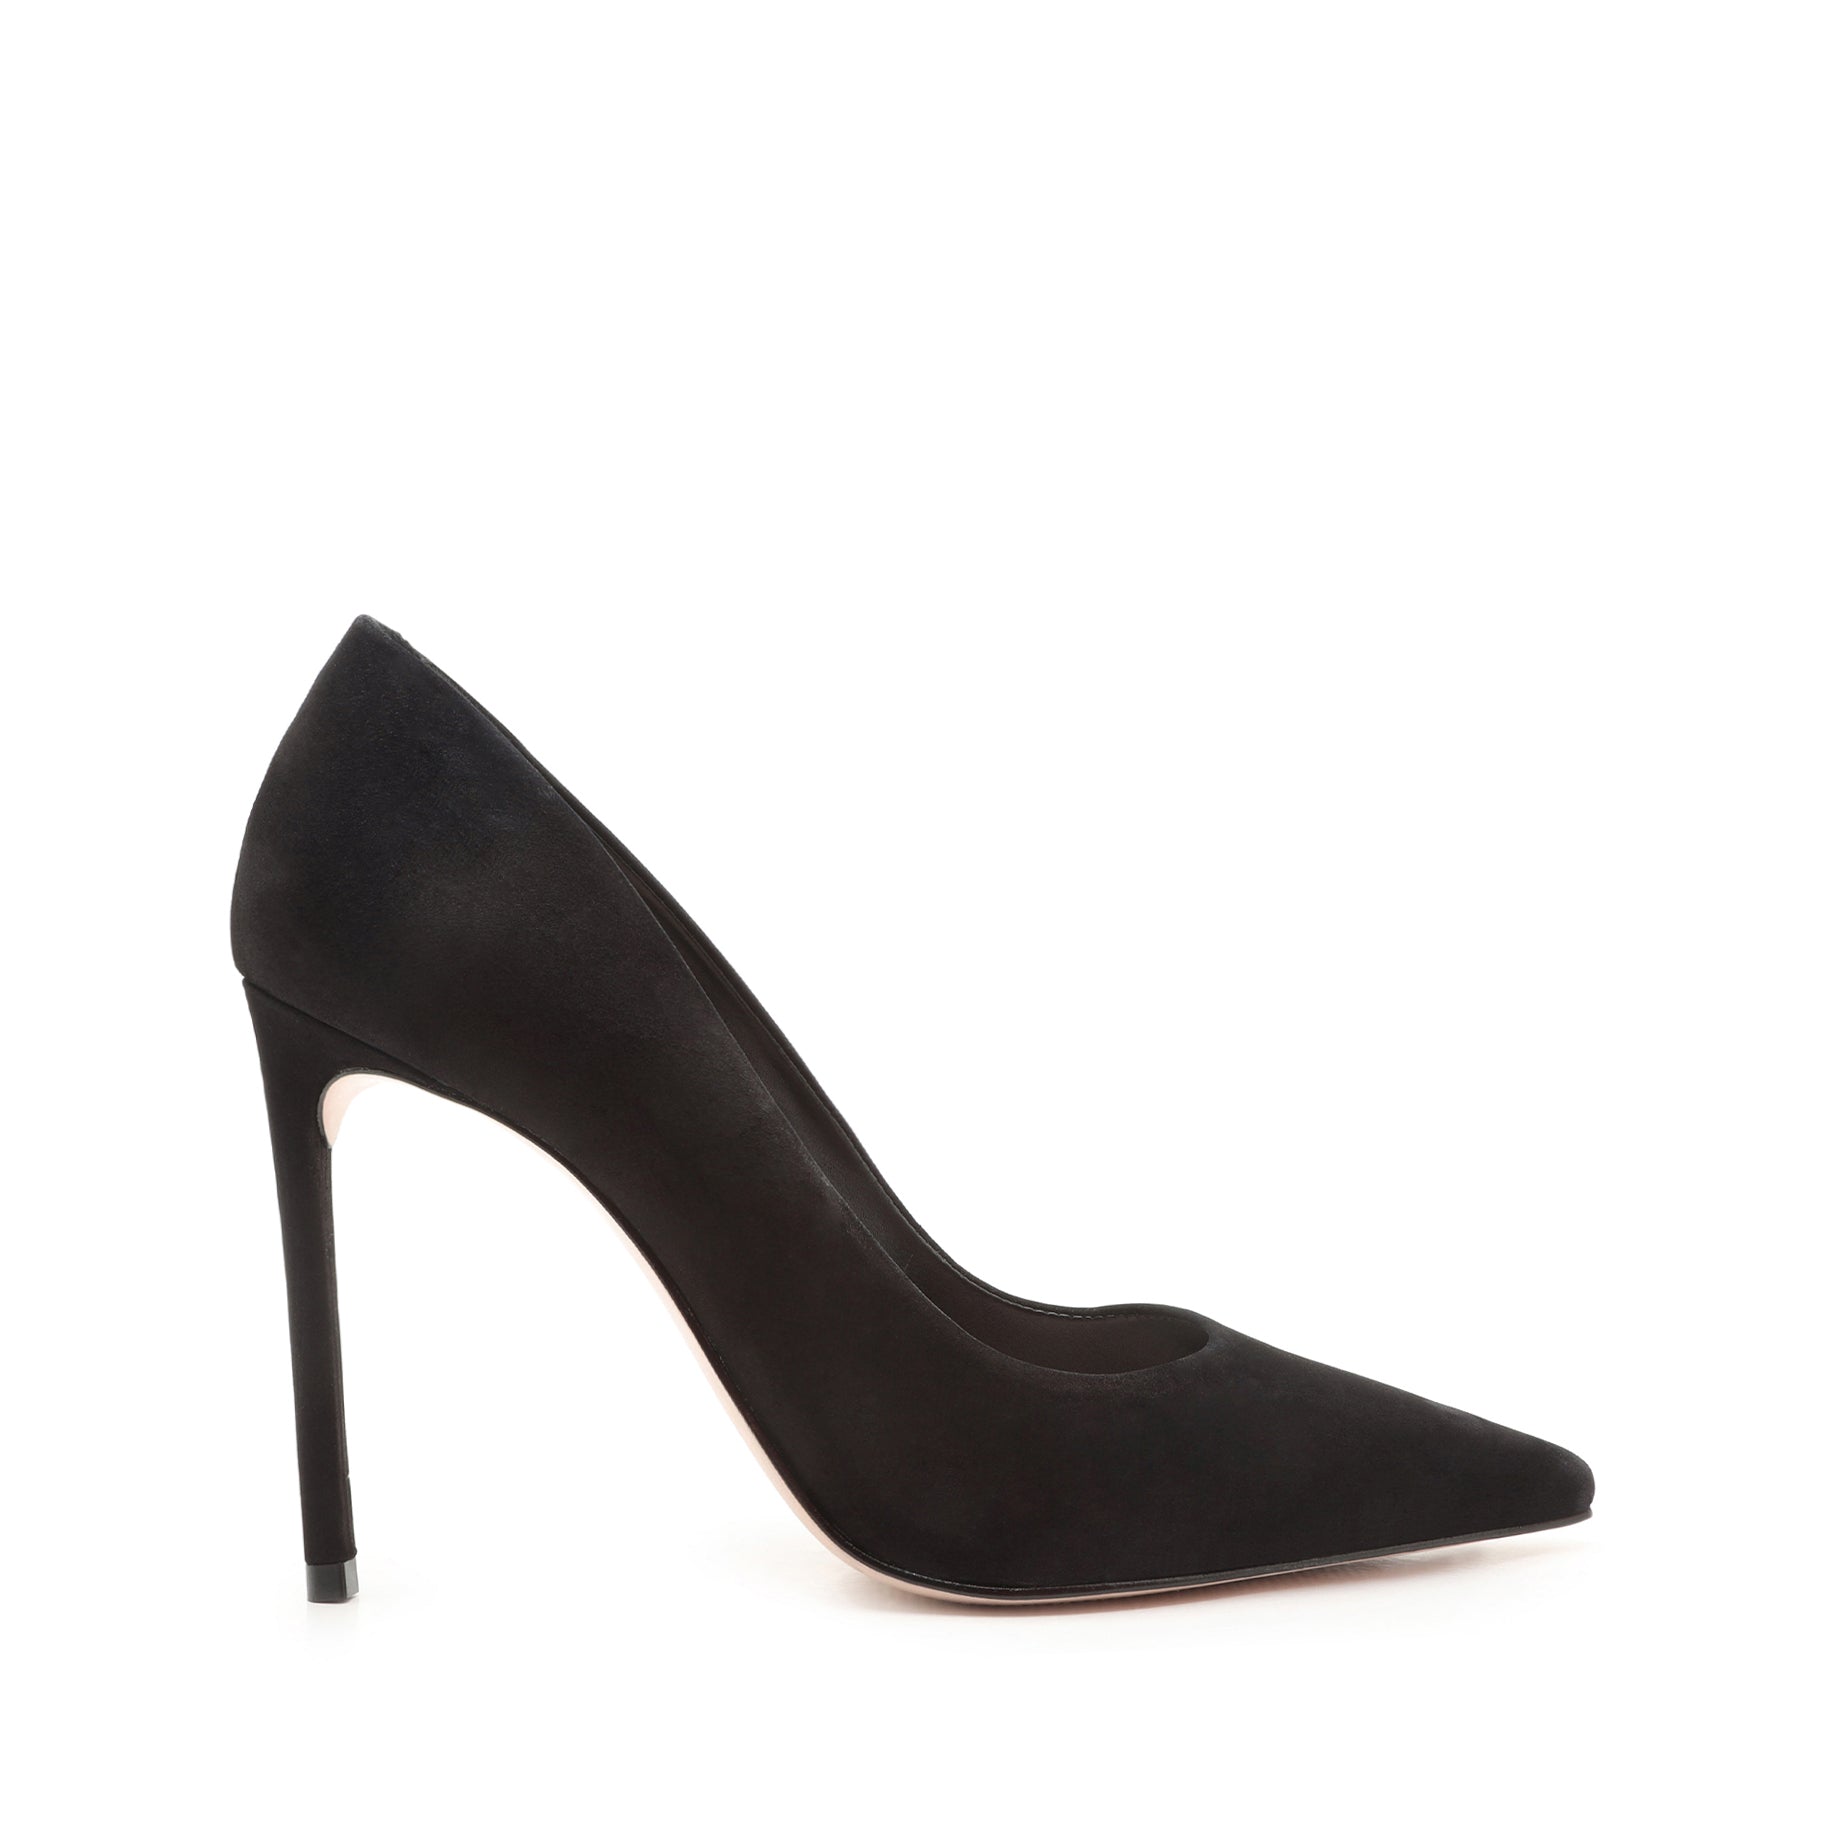 Lou Pump: Classic Shoe with a Pointed Toe | Schutz